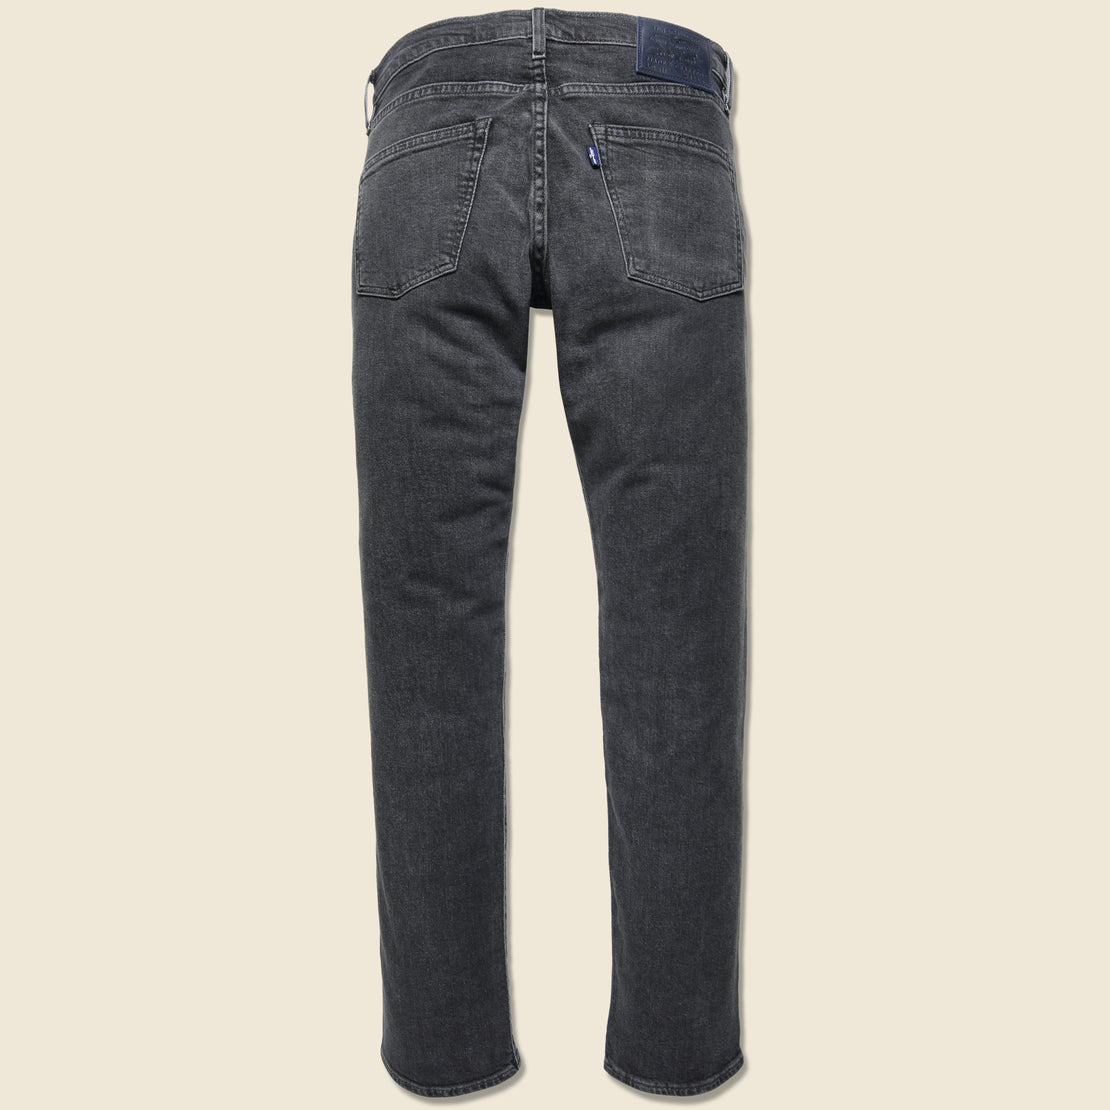 511 Slim Fit Jean - Crucible - Levis Made & Crafted - STAG Provisions - Pants - Denim